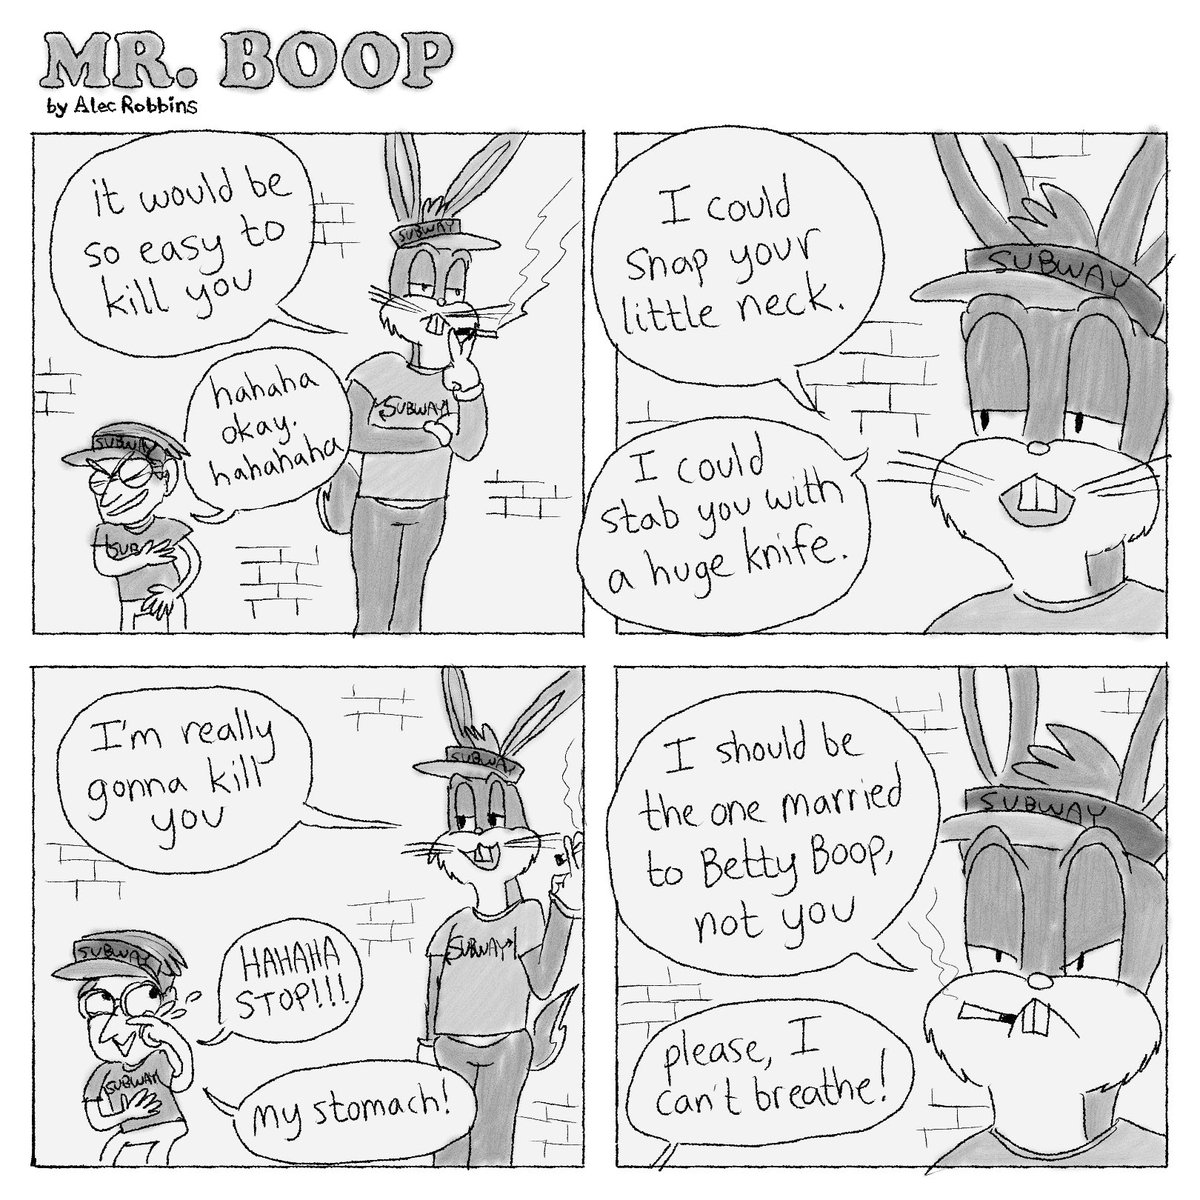 Mr. Boop has a chat with his Subway coworker Bugs Bunny